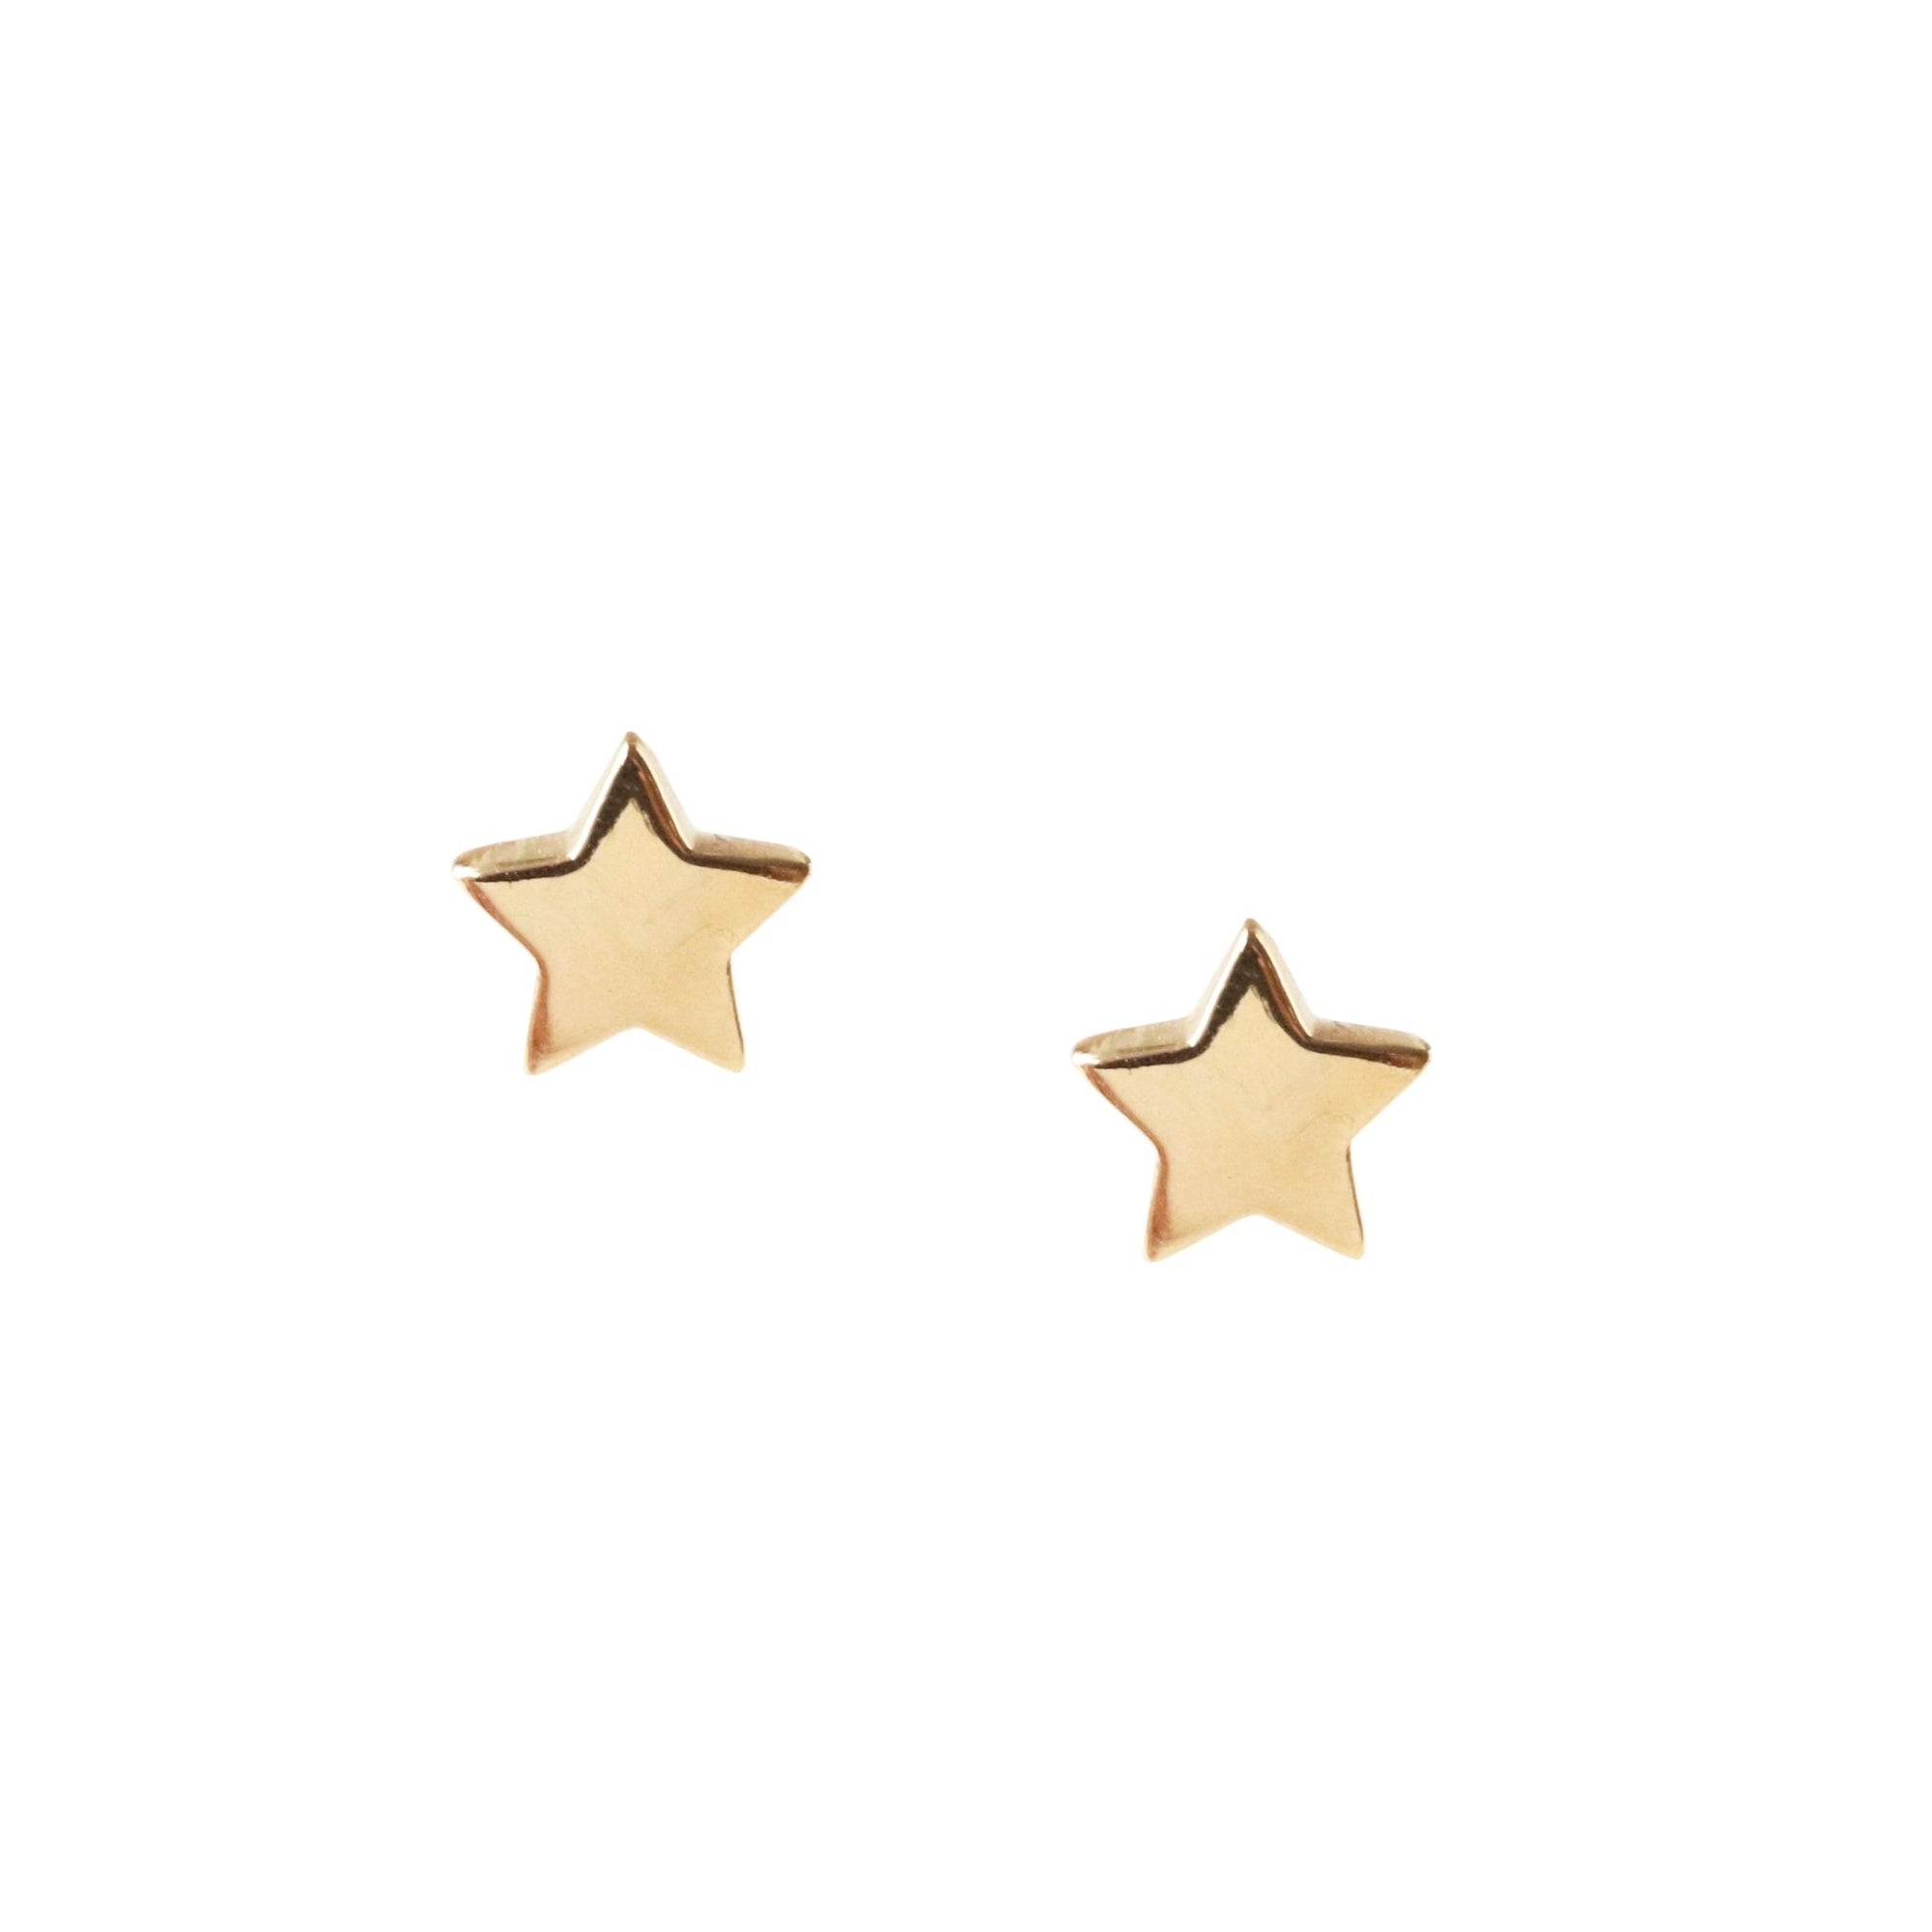 TINY POISE STAR STUDS - GOLD - SO PRETTY CARA COTTER